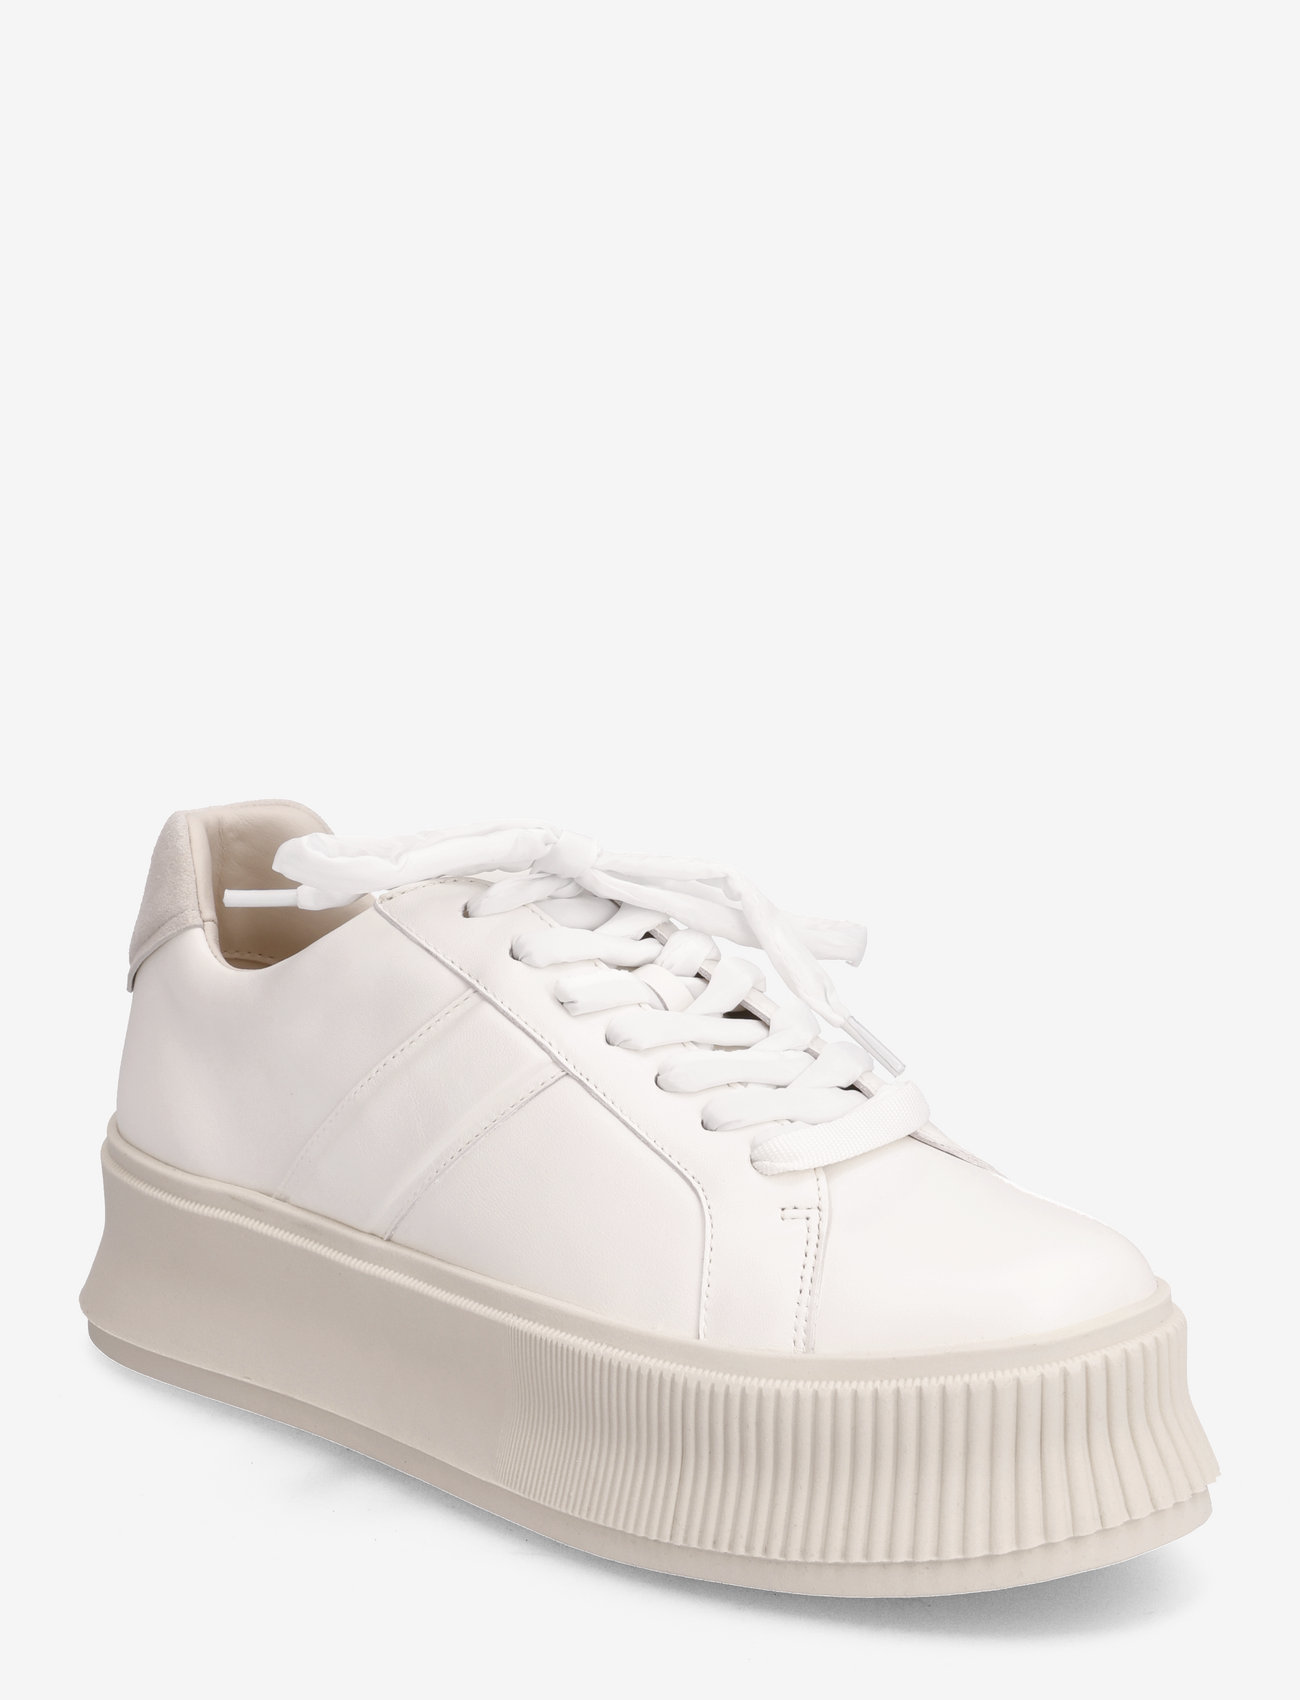 NEWD.Tamaris - Woms Lace-up - lage sneakers - white/cream - 0